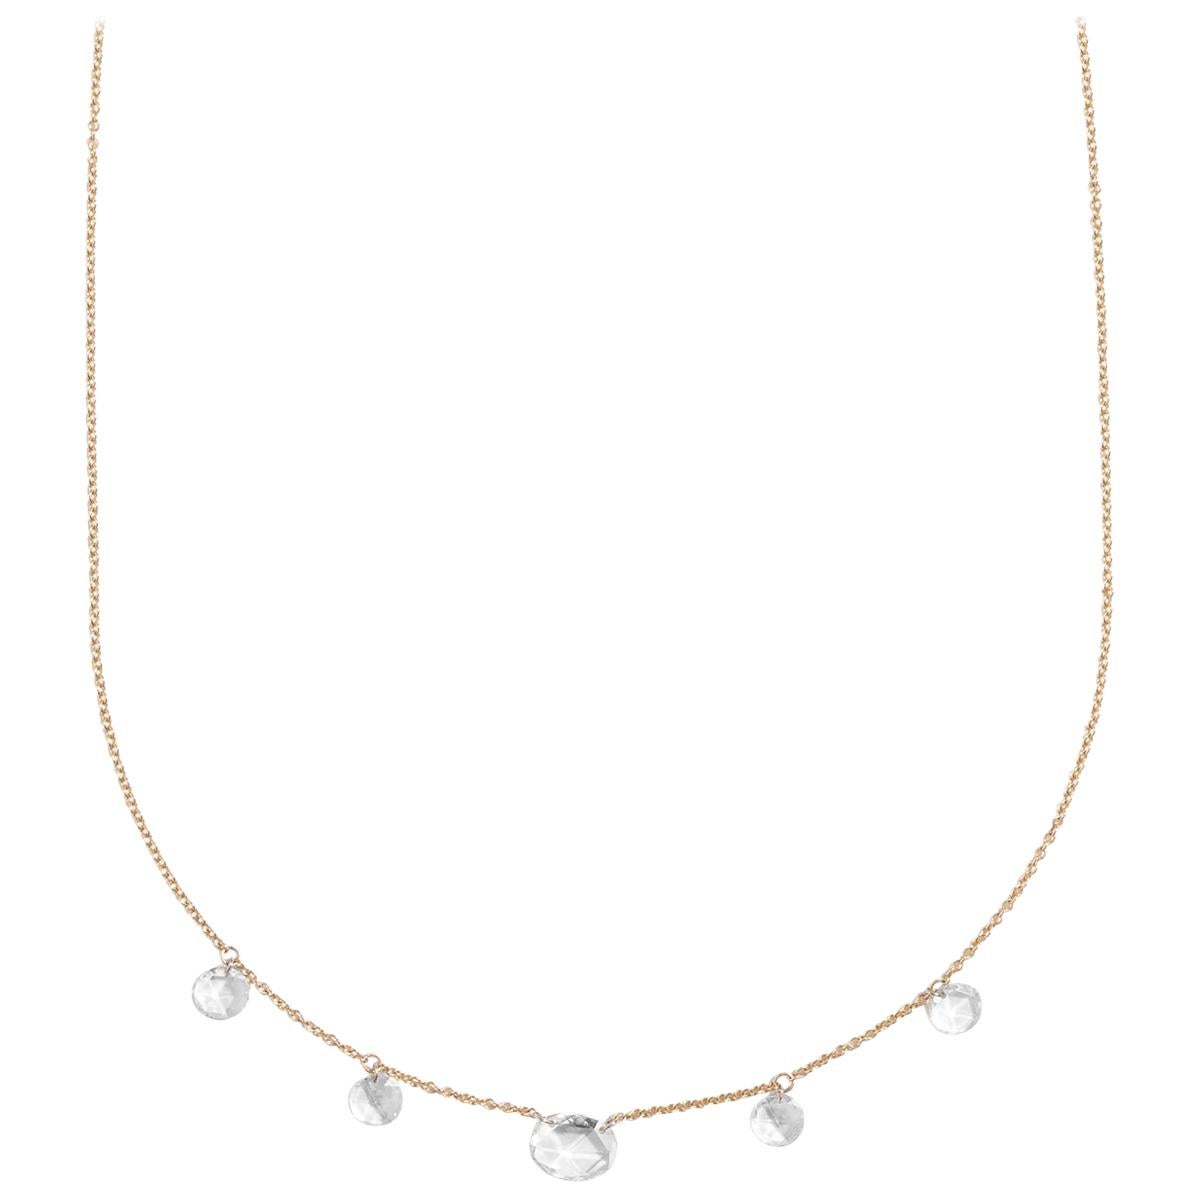 Astraea Necklace, Floating Rose Cut Diamond Necklace by Selin Kent For Sale